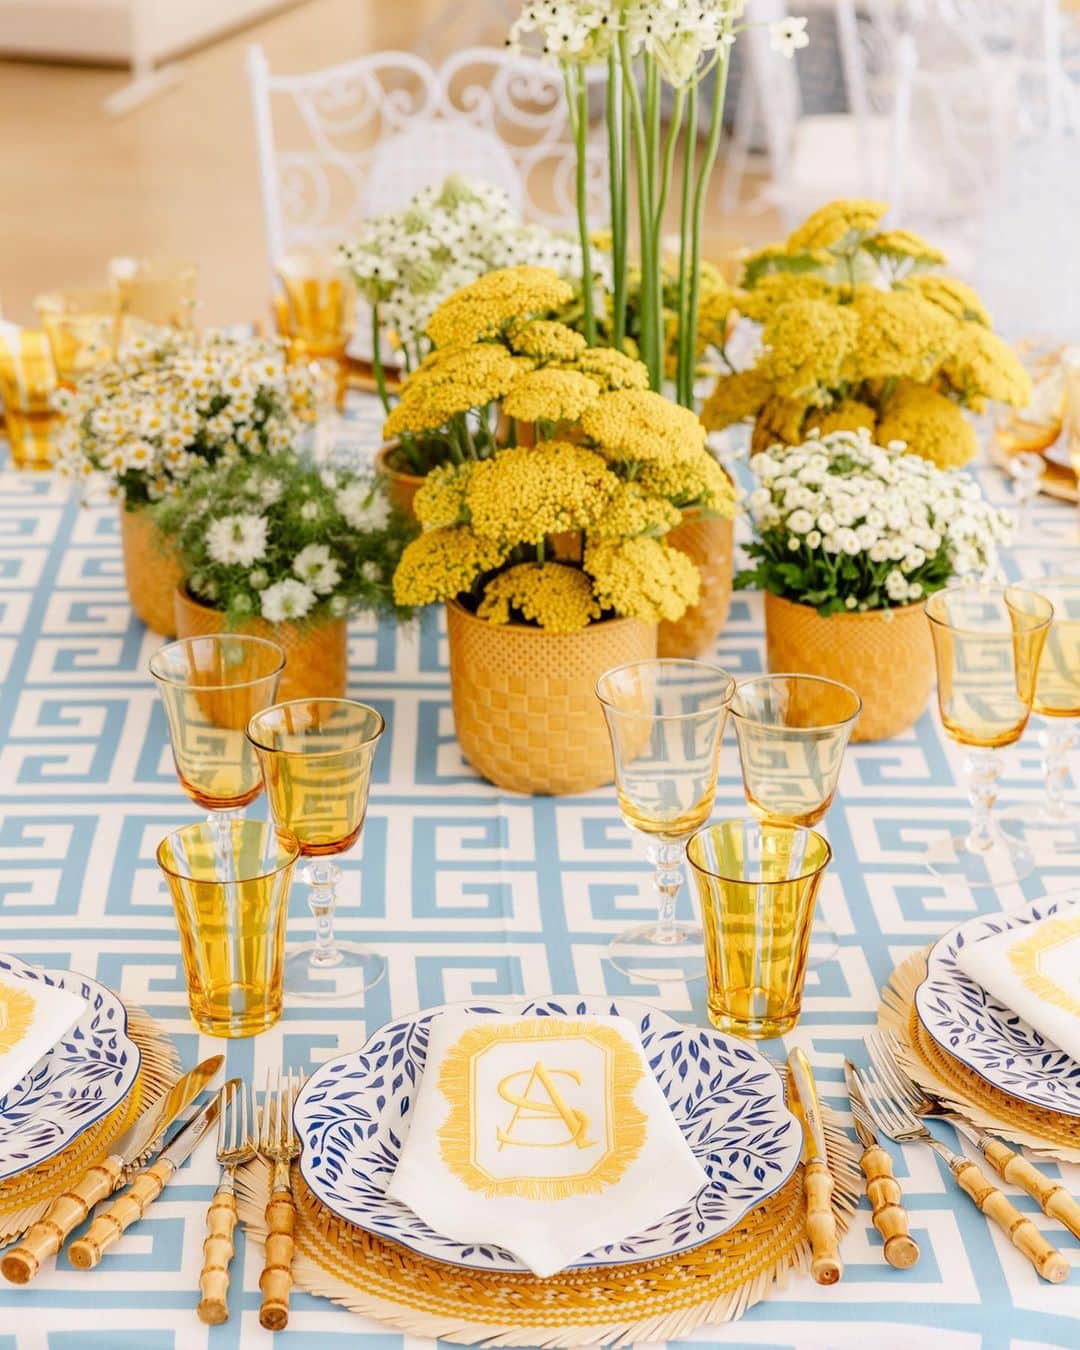 Ceci Johnsonのインスタグラム：「WEDDING | S&A’s celebration concluded with a delightful poolside brunch. Drawing inspiration from the charming yellow and white stripe parasols showcased on page 3 of the book invitation, we enhanced the design using gold foil stripes. To complement the theme, we crafted matching signage and napkins featuring an embroidered monogram in vibrant yellow designed by our team. #CeciCouture ⠀⠀⠀⠀⠀⠀⠀⠀⠀ CREATIVE PARTNERS: Luxury Invitation & Event Branding: @cecinewyork Planning & Design: @lavenderandroseweddings Venue & Catering:  @fscapferrat Photography: @daniloandsharon Videography: @chromata_films_weddings Production: @deco_flamme Tableware: @maisonmargauxltd @maison_options Floral Design: @roni_floral_design Music: @troubadoursriviera @rozgajelenaofficial Entertainment: @prodiammclescure ⠀⠀⠀⠀⠀⠀⠀⠀⠀ #cecinewyork #ceciwedding #luxuryinvitations #elegantdesigns #coutureinvites #opulentdetails #bespokeinvitations #ccelebrations #artistryinvitations #highenddesigns #luxurystationery #premiuminvitations #exquisitedetails #invitationelegance #celebrateinstyle #glamorousinvites #luxurycelebrations #finestationery #customizedelegance #celebrationperfection #invitationcouture #elevateyourevent #luxuryeventplanning」